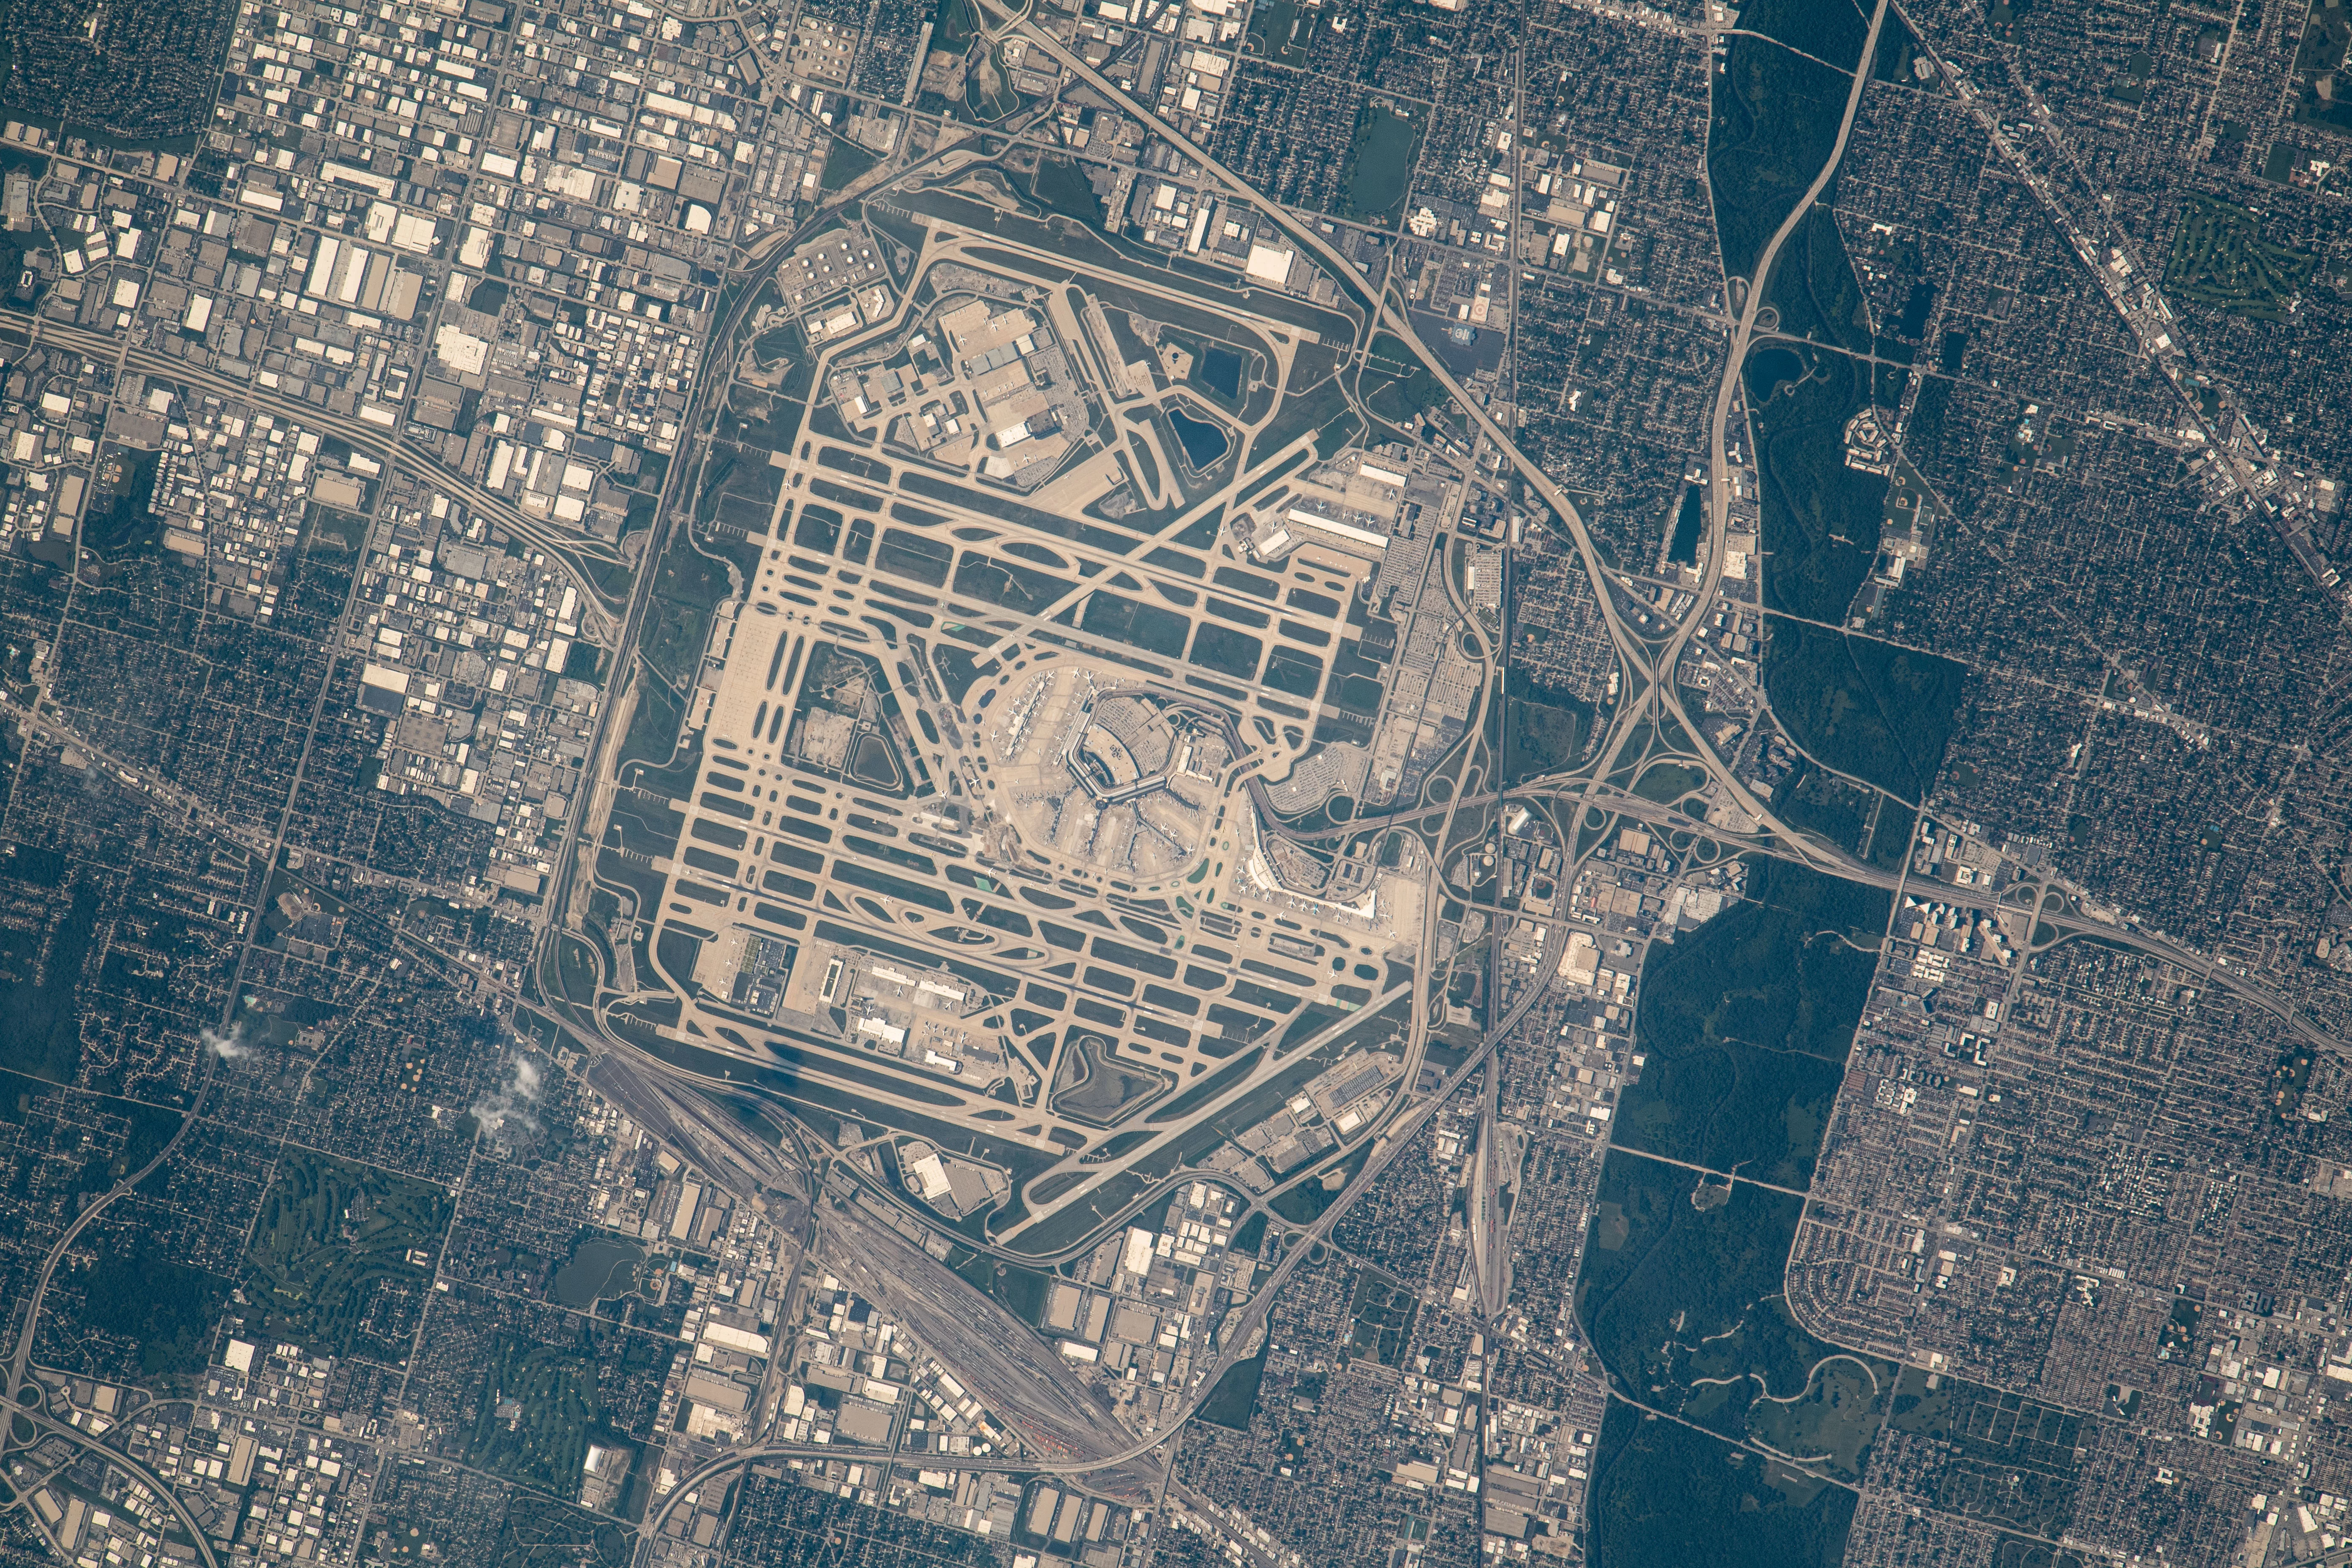 Chicago O'Hare International Airport as seen from space